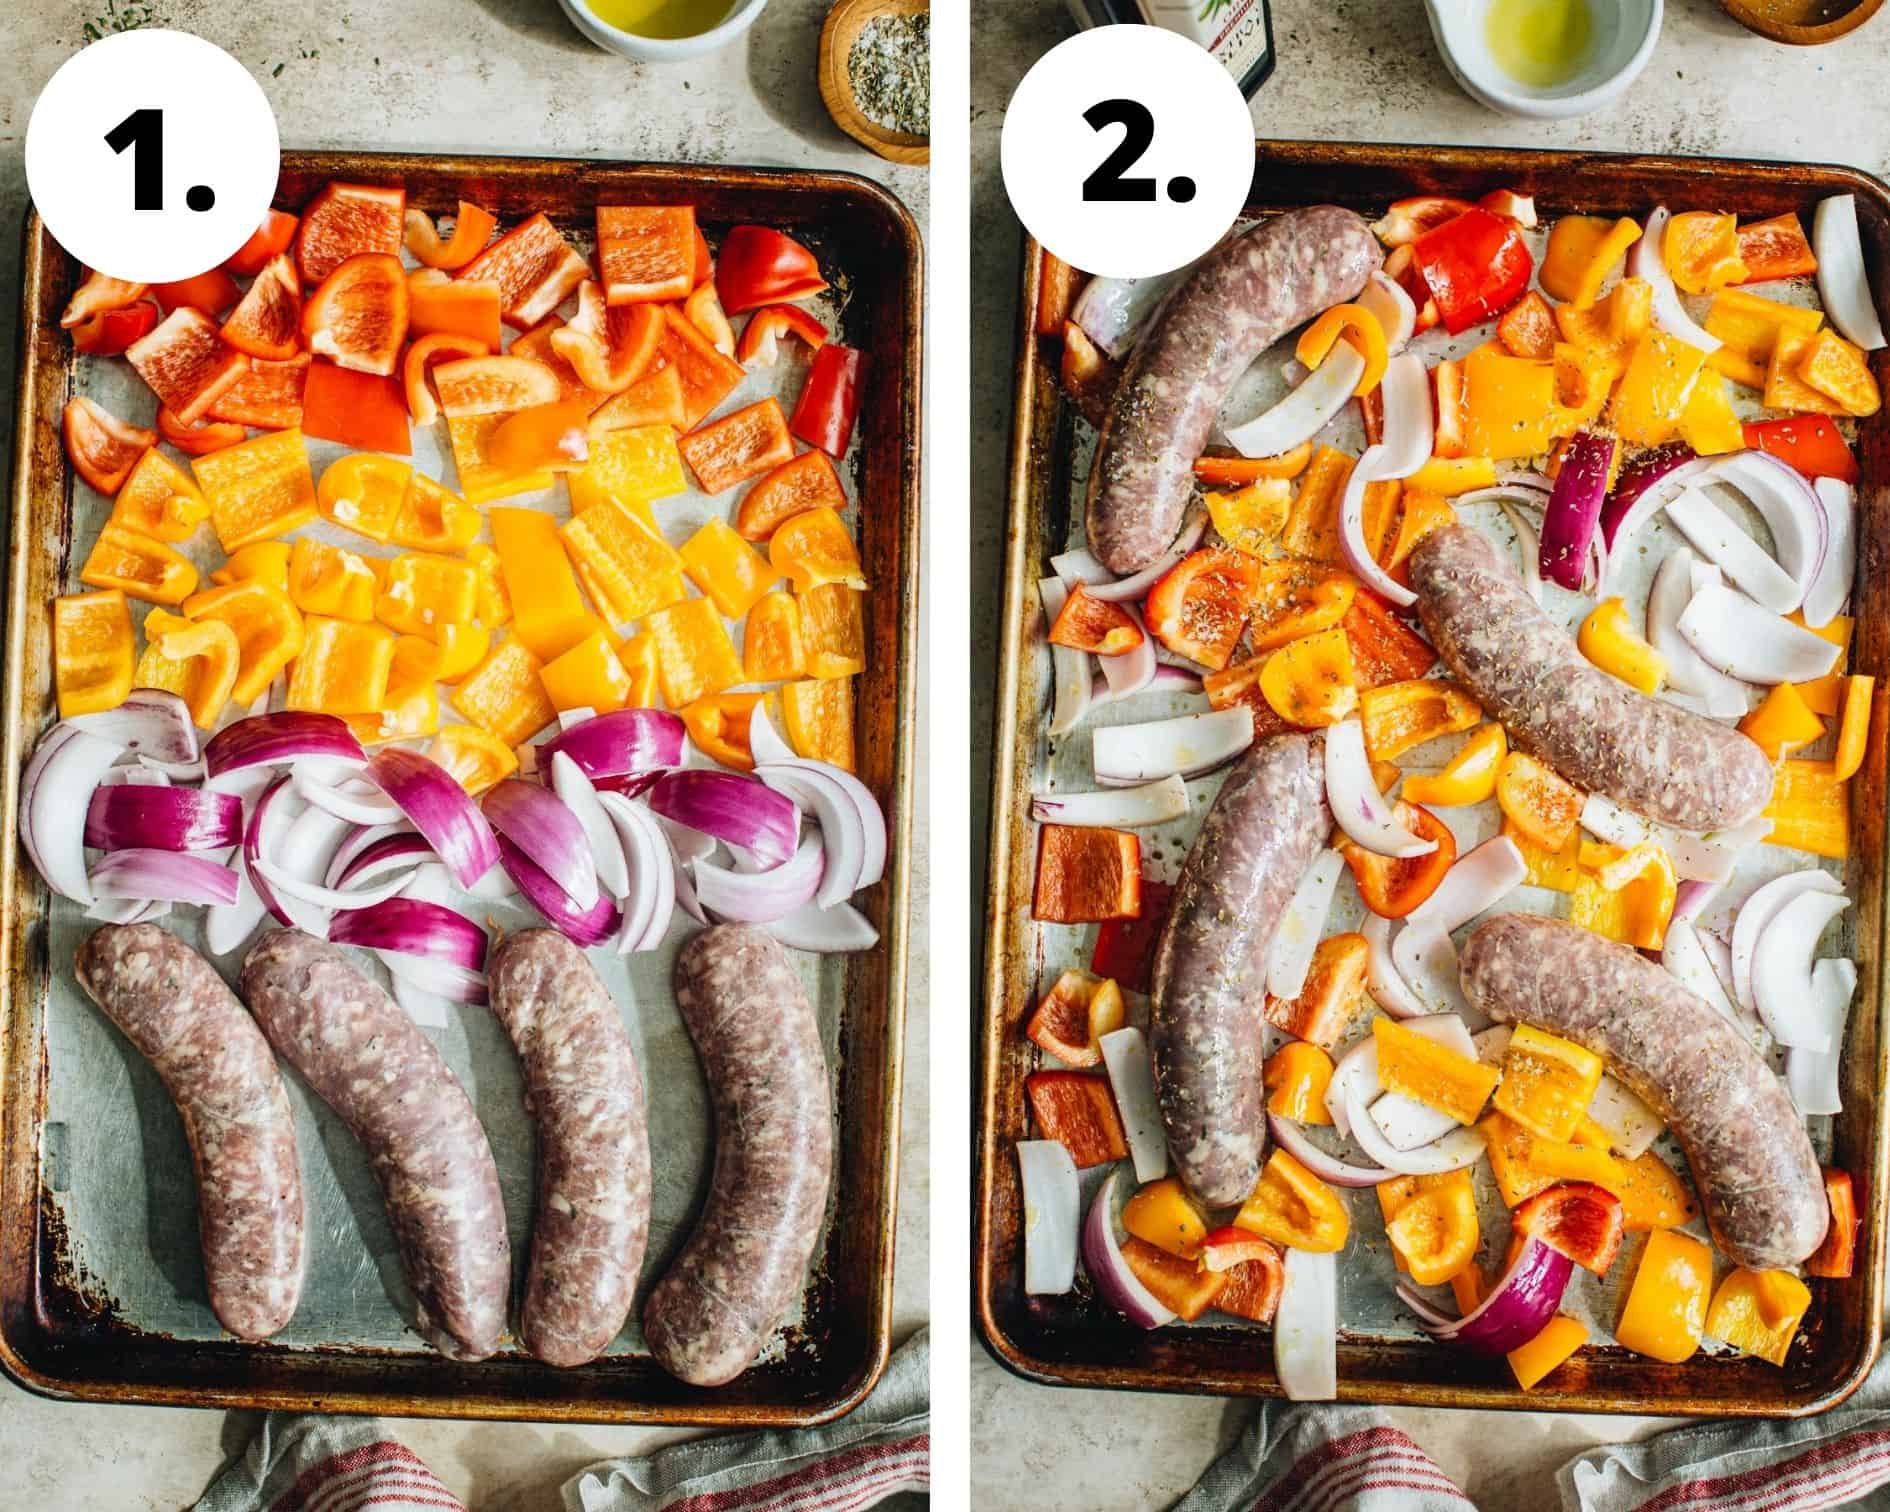 Sausage and peppers in the oven process steps 1 and 2.